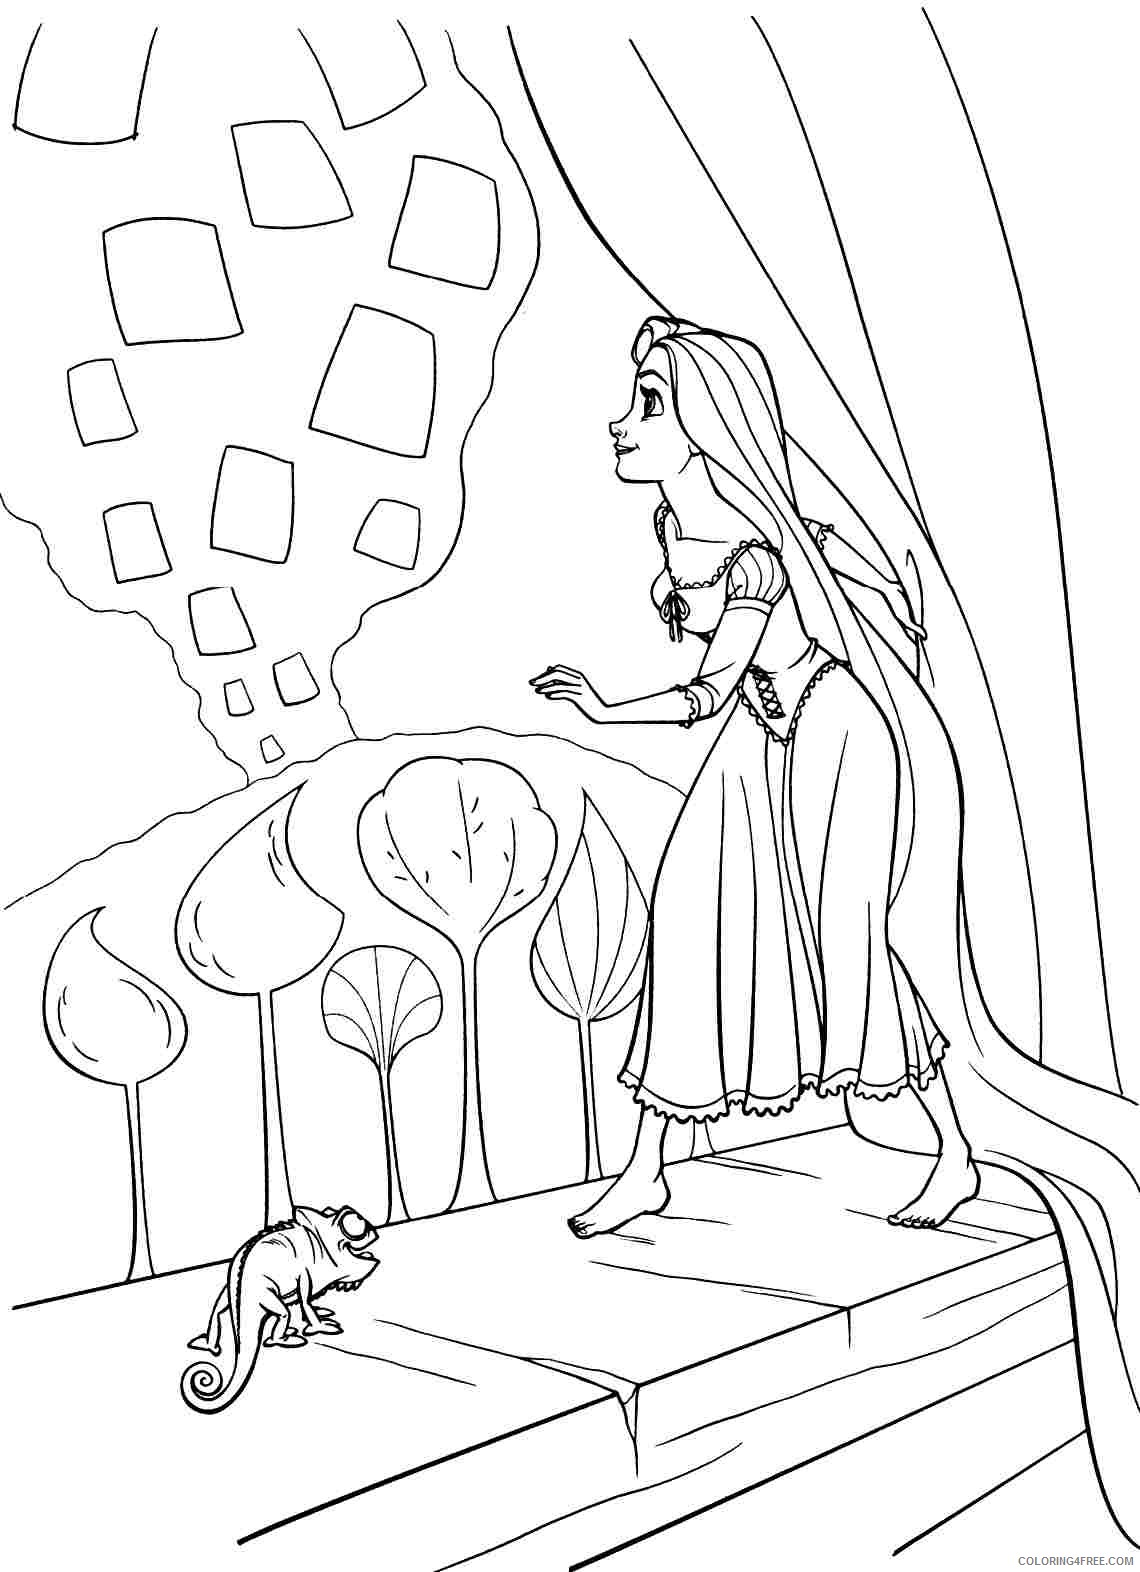 Rapunzel Coloring Pages Cartoons Tangled Rapunzels Printable 2020 5350 Coloring4free